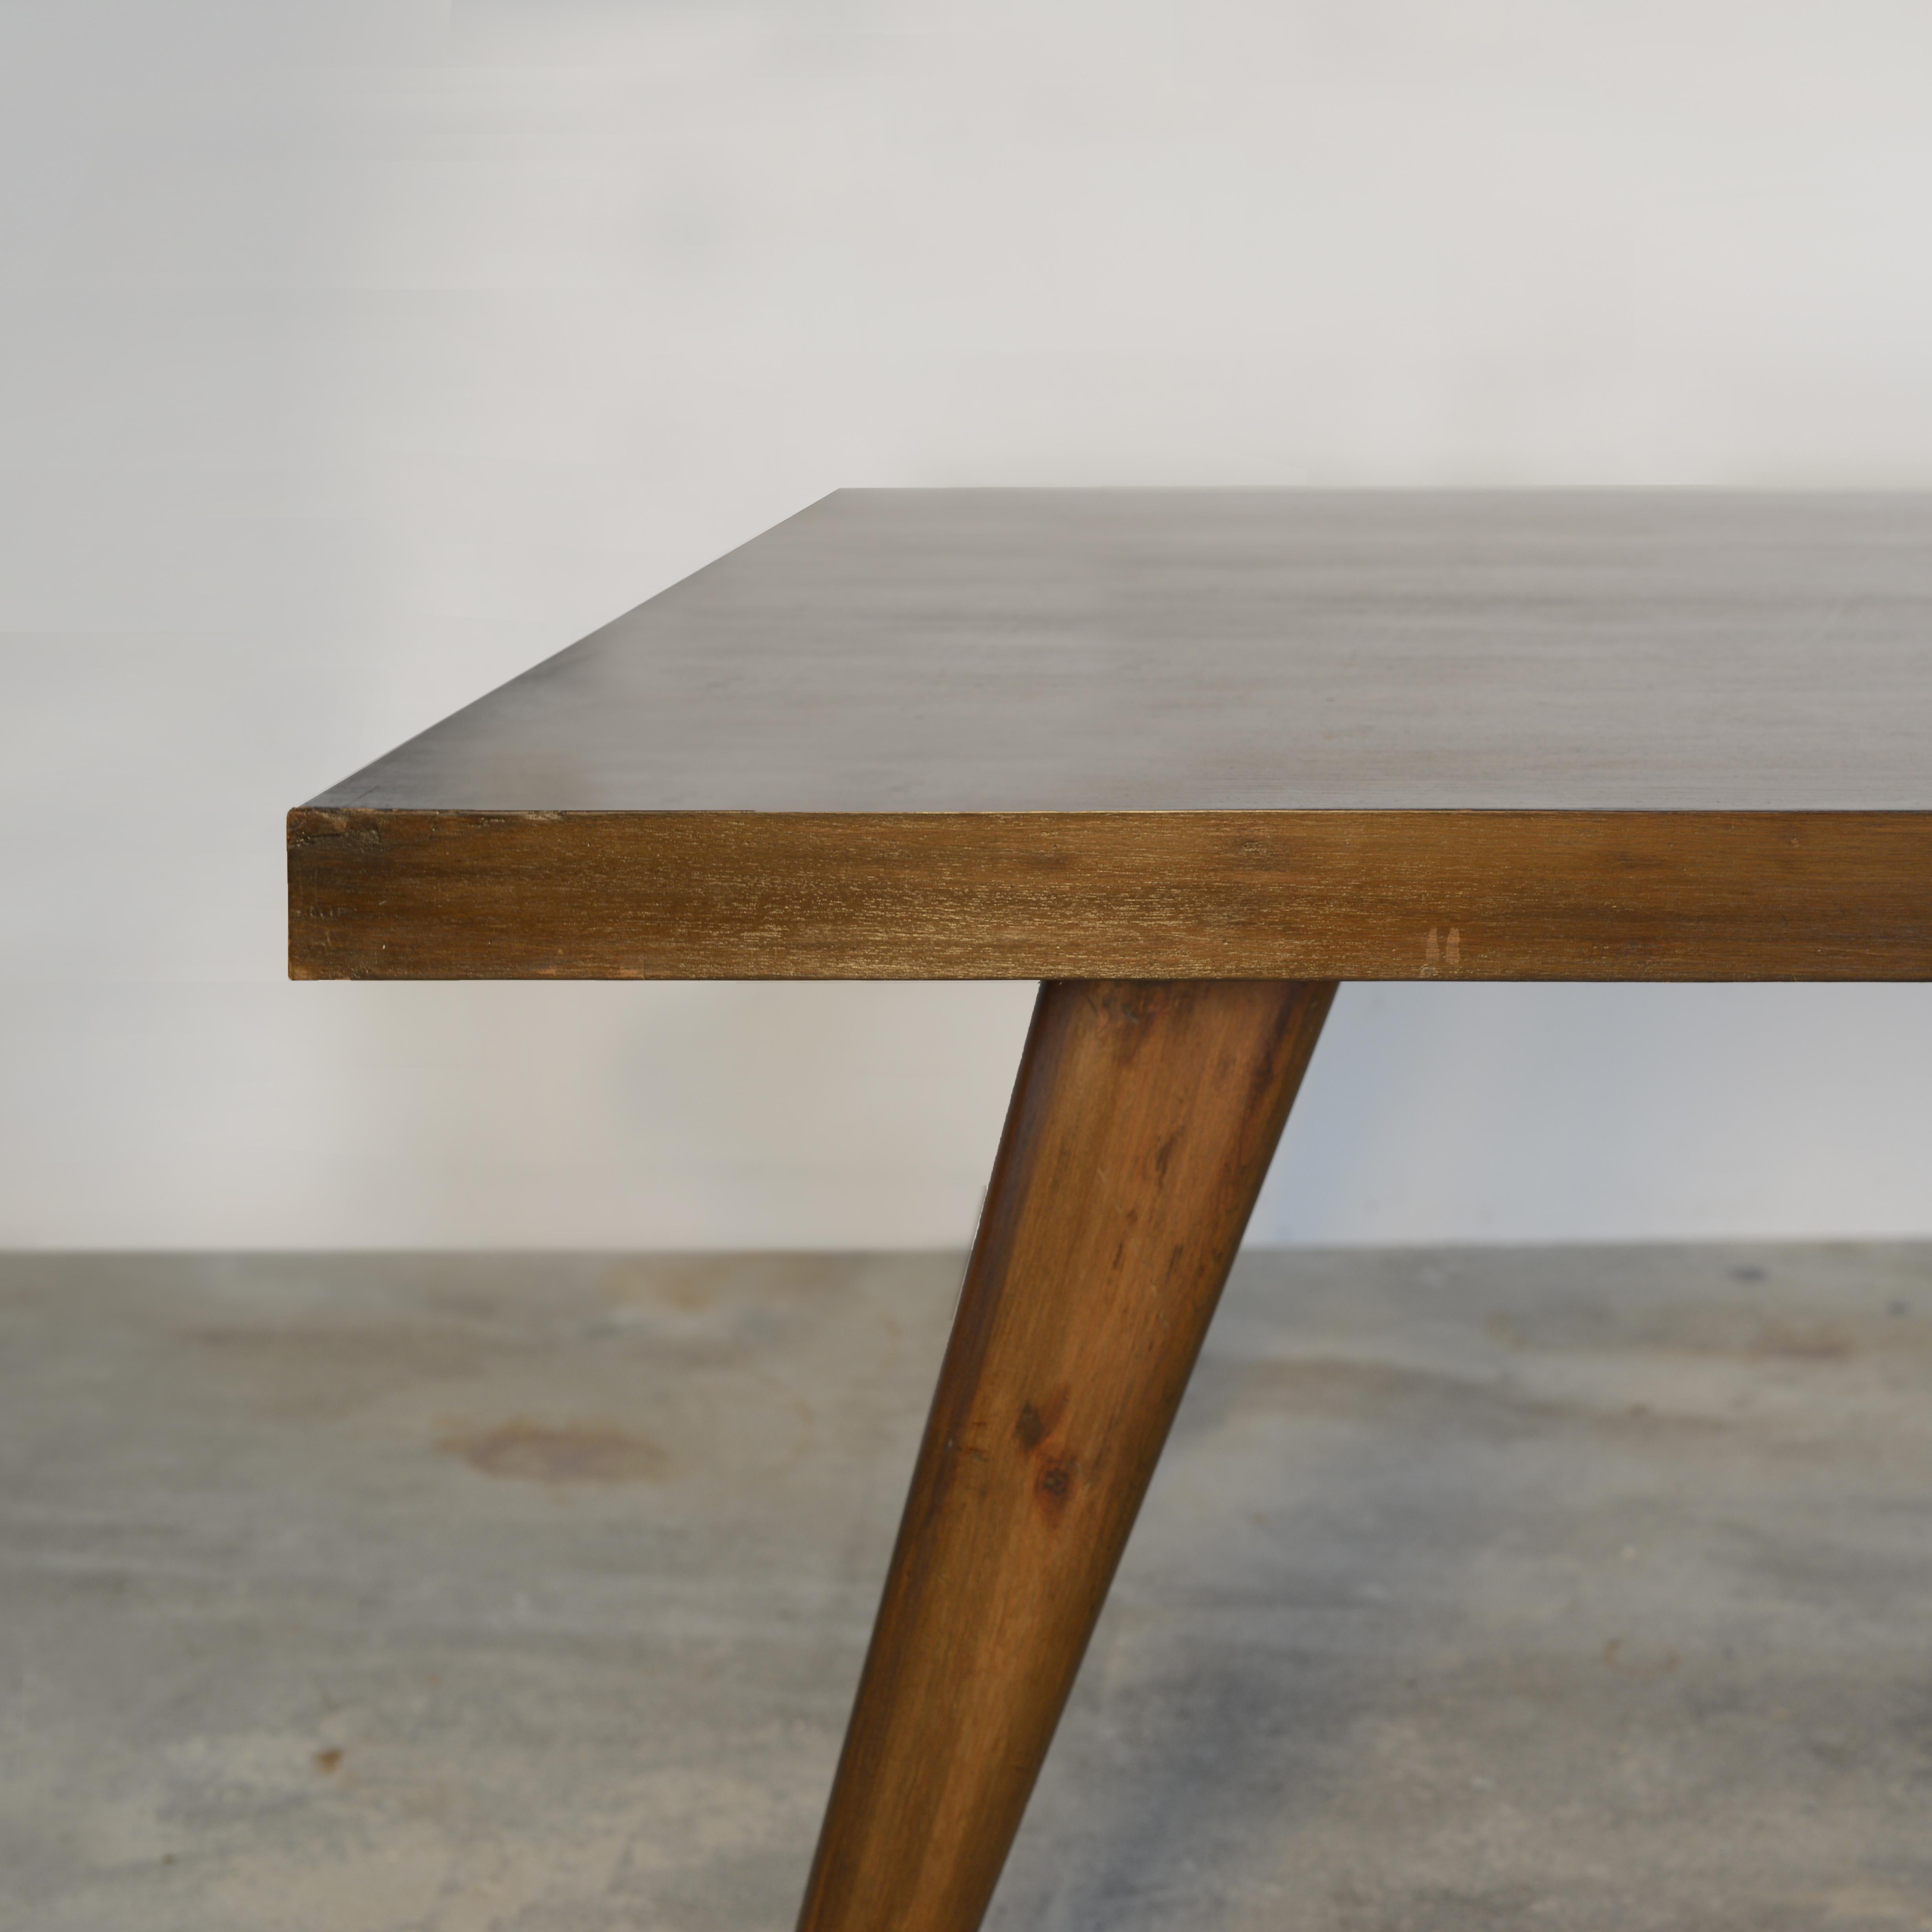 Mid-20th Century Pierre Jeanneret PJ-TA-01-C Dining Table / Authentic Mid-Century Modern For Sale